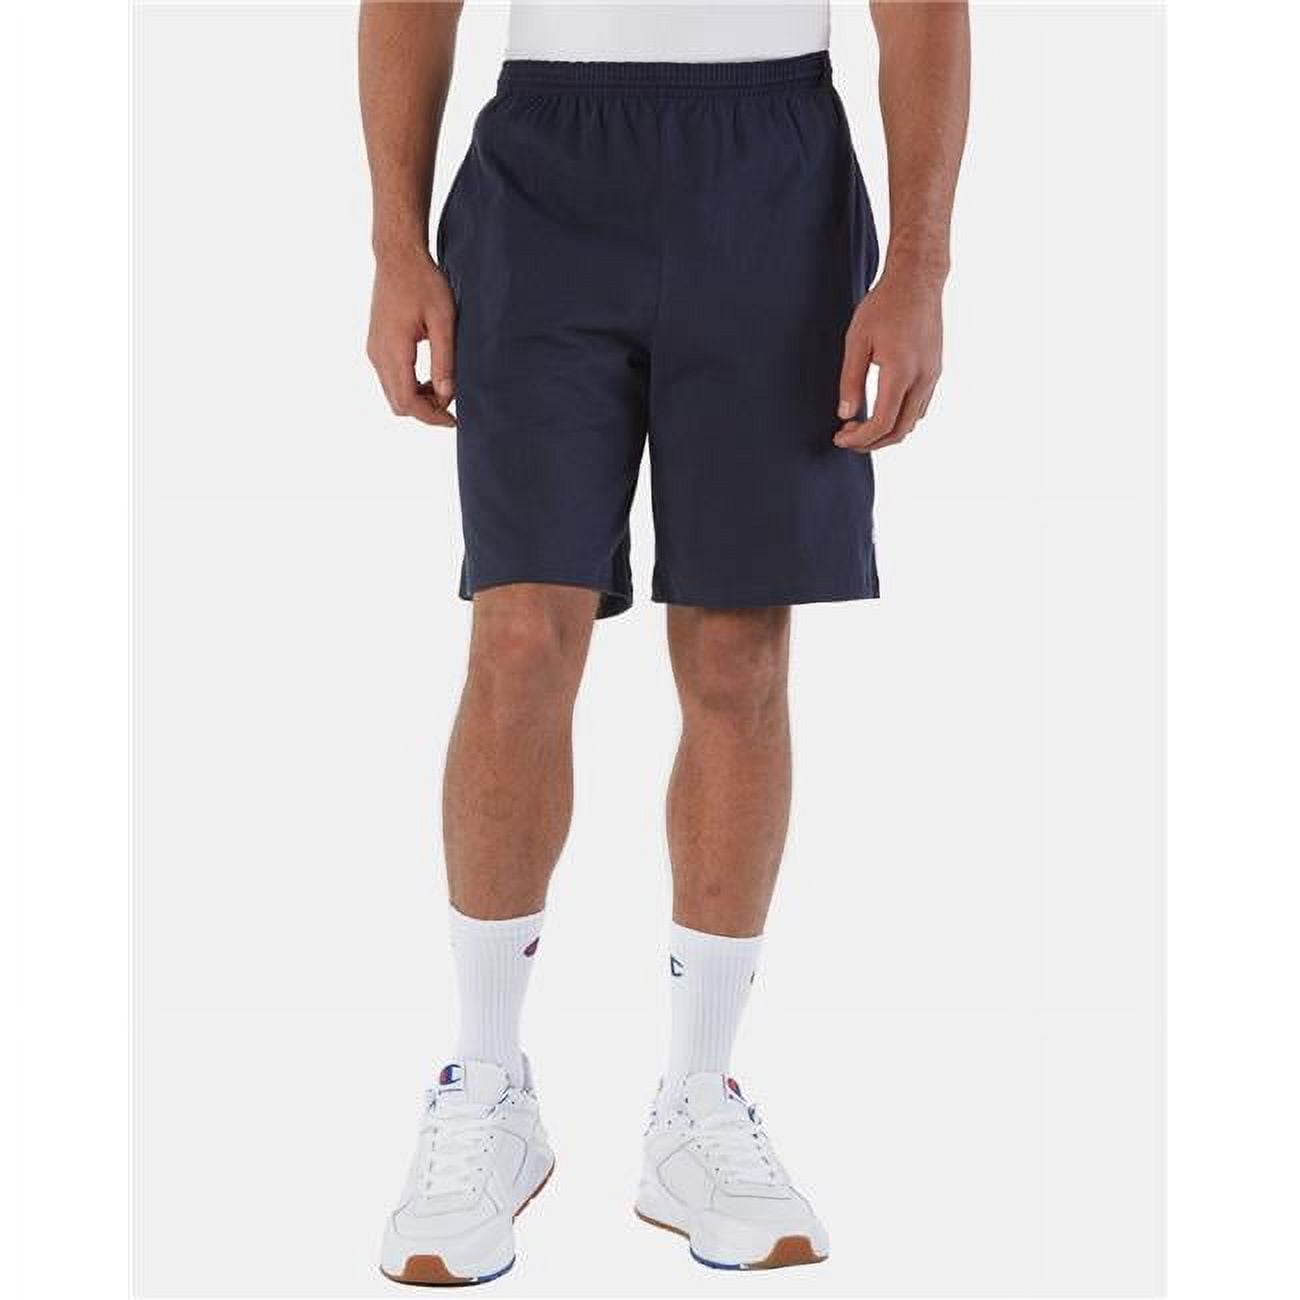 Champion Black And White Tearaway Shorts for Men